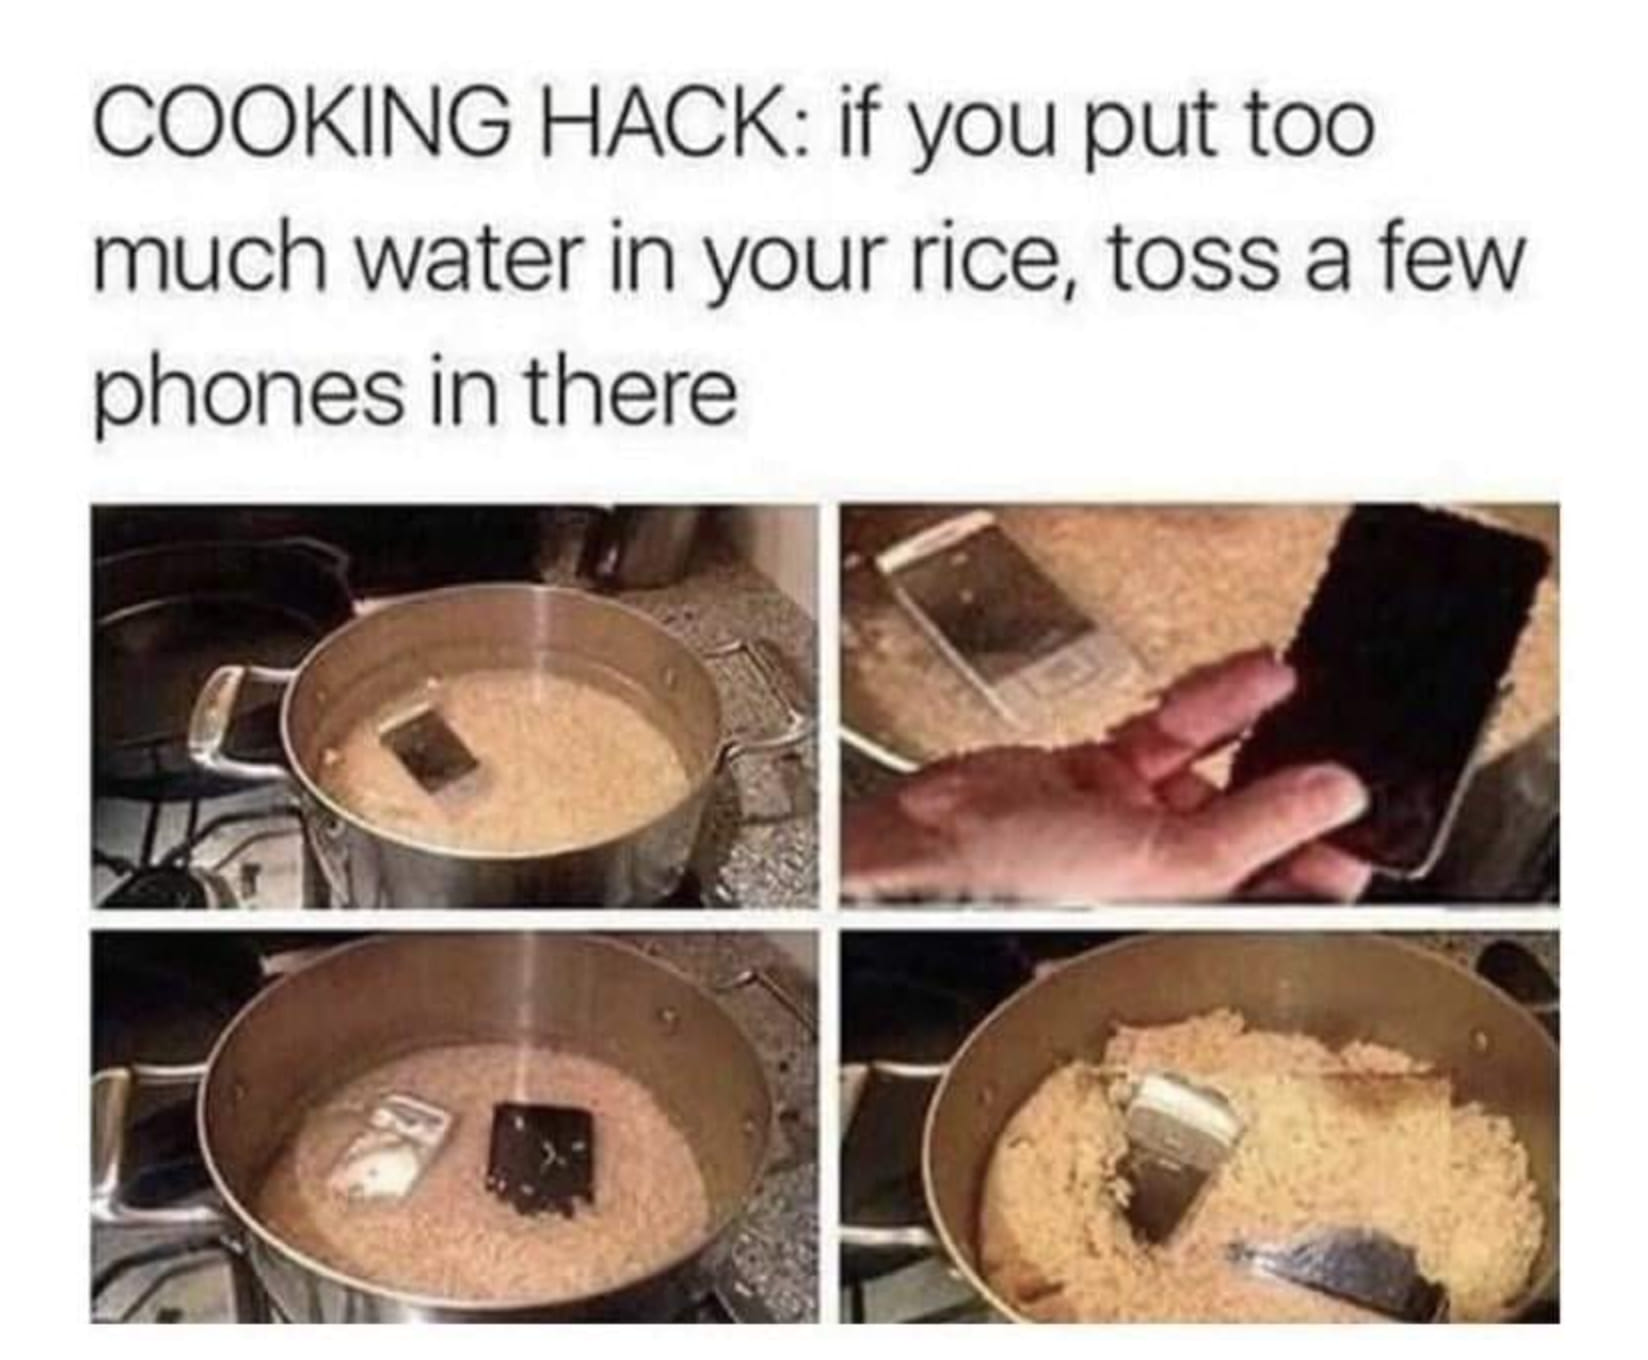 cooking hack, if you put too much water in your rice, toss a few phones in there